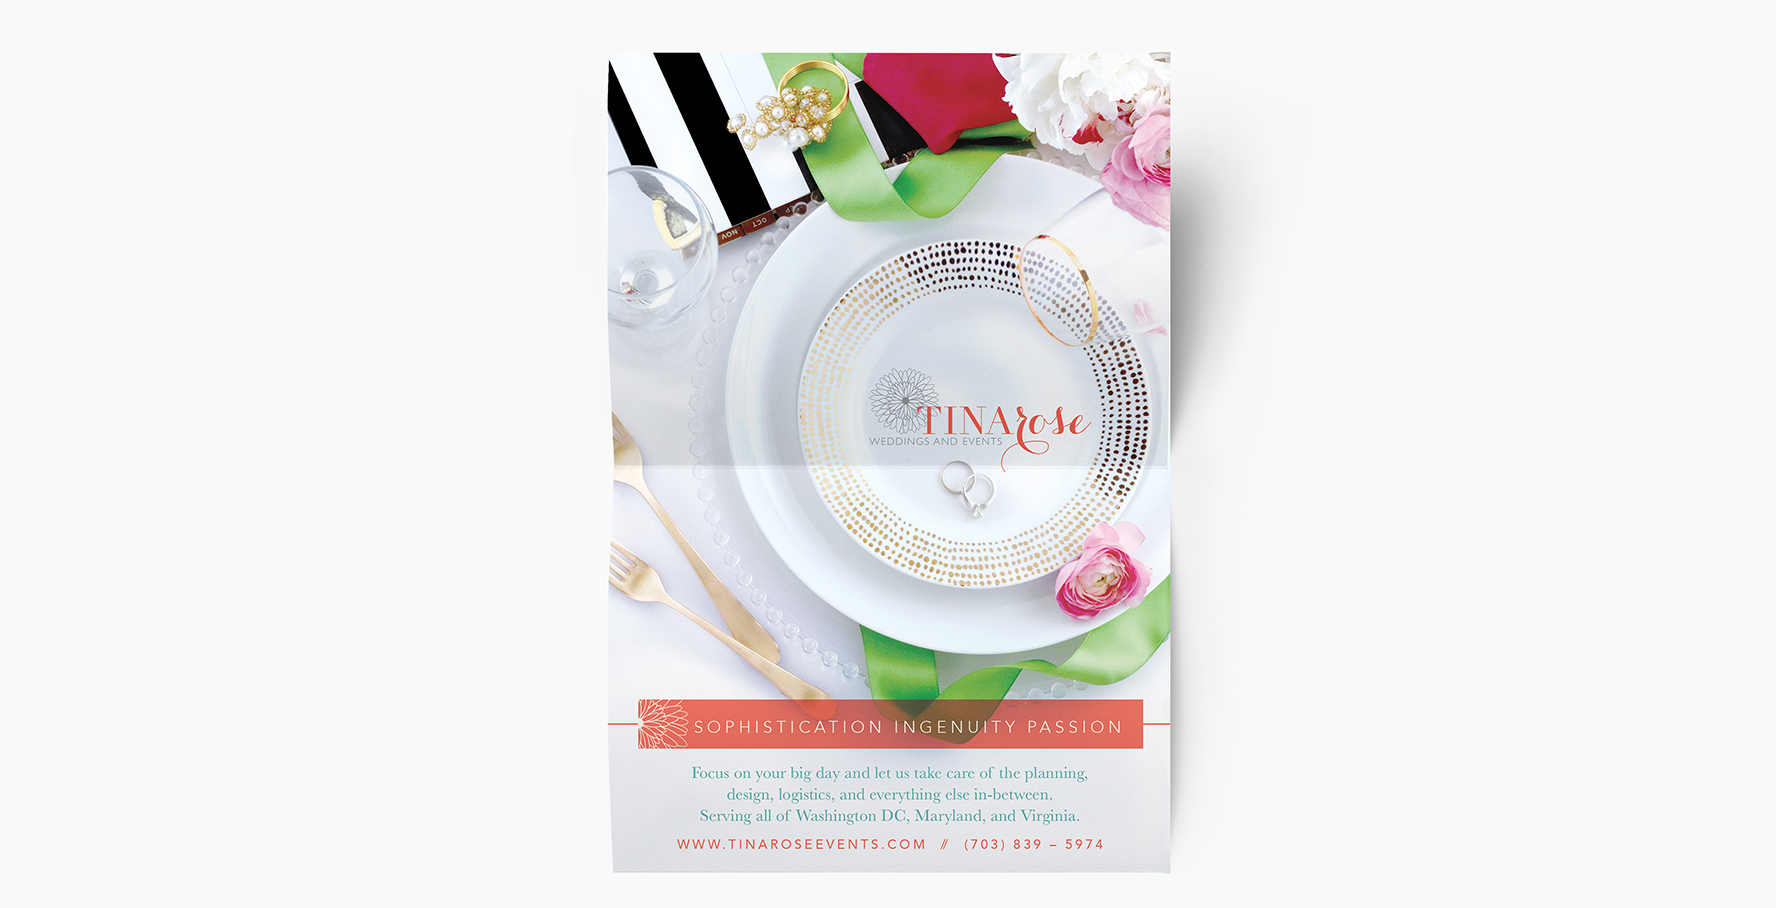 TinaRose Weddings and Events' The Knot Magazine Ad